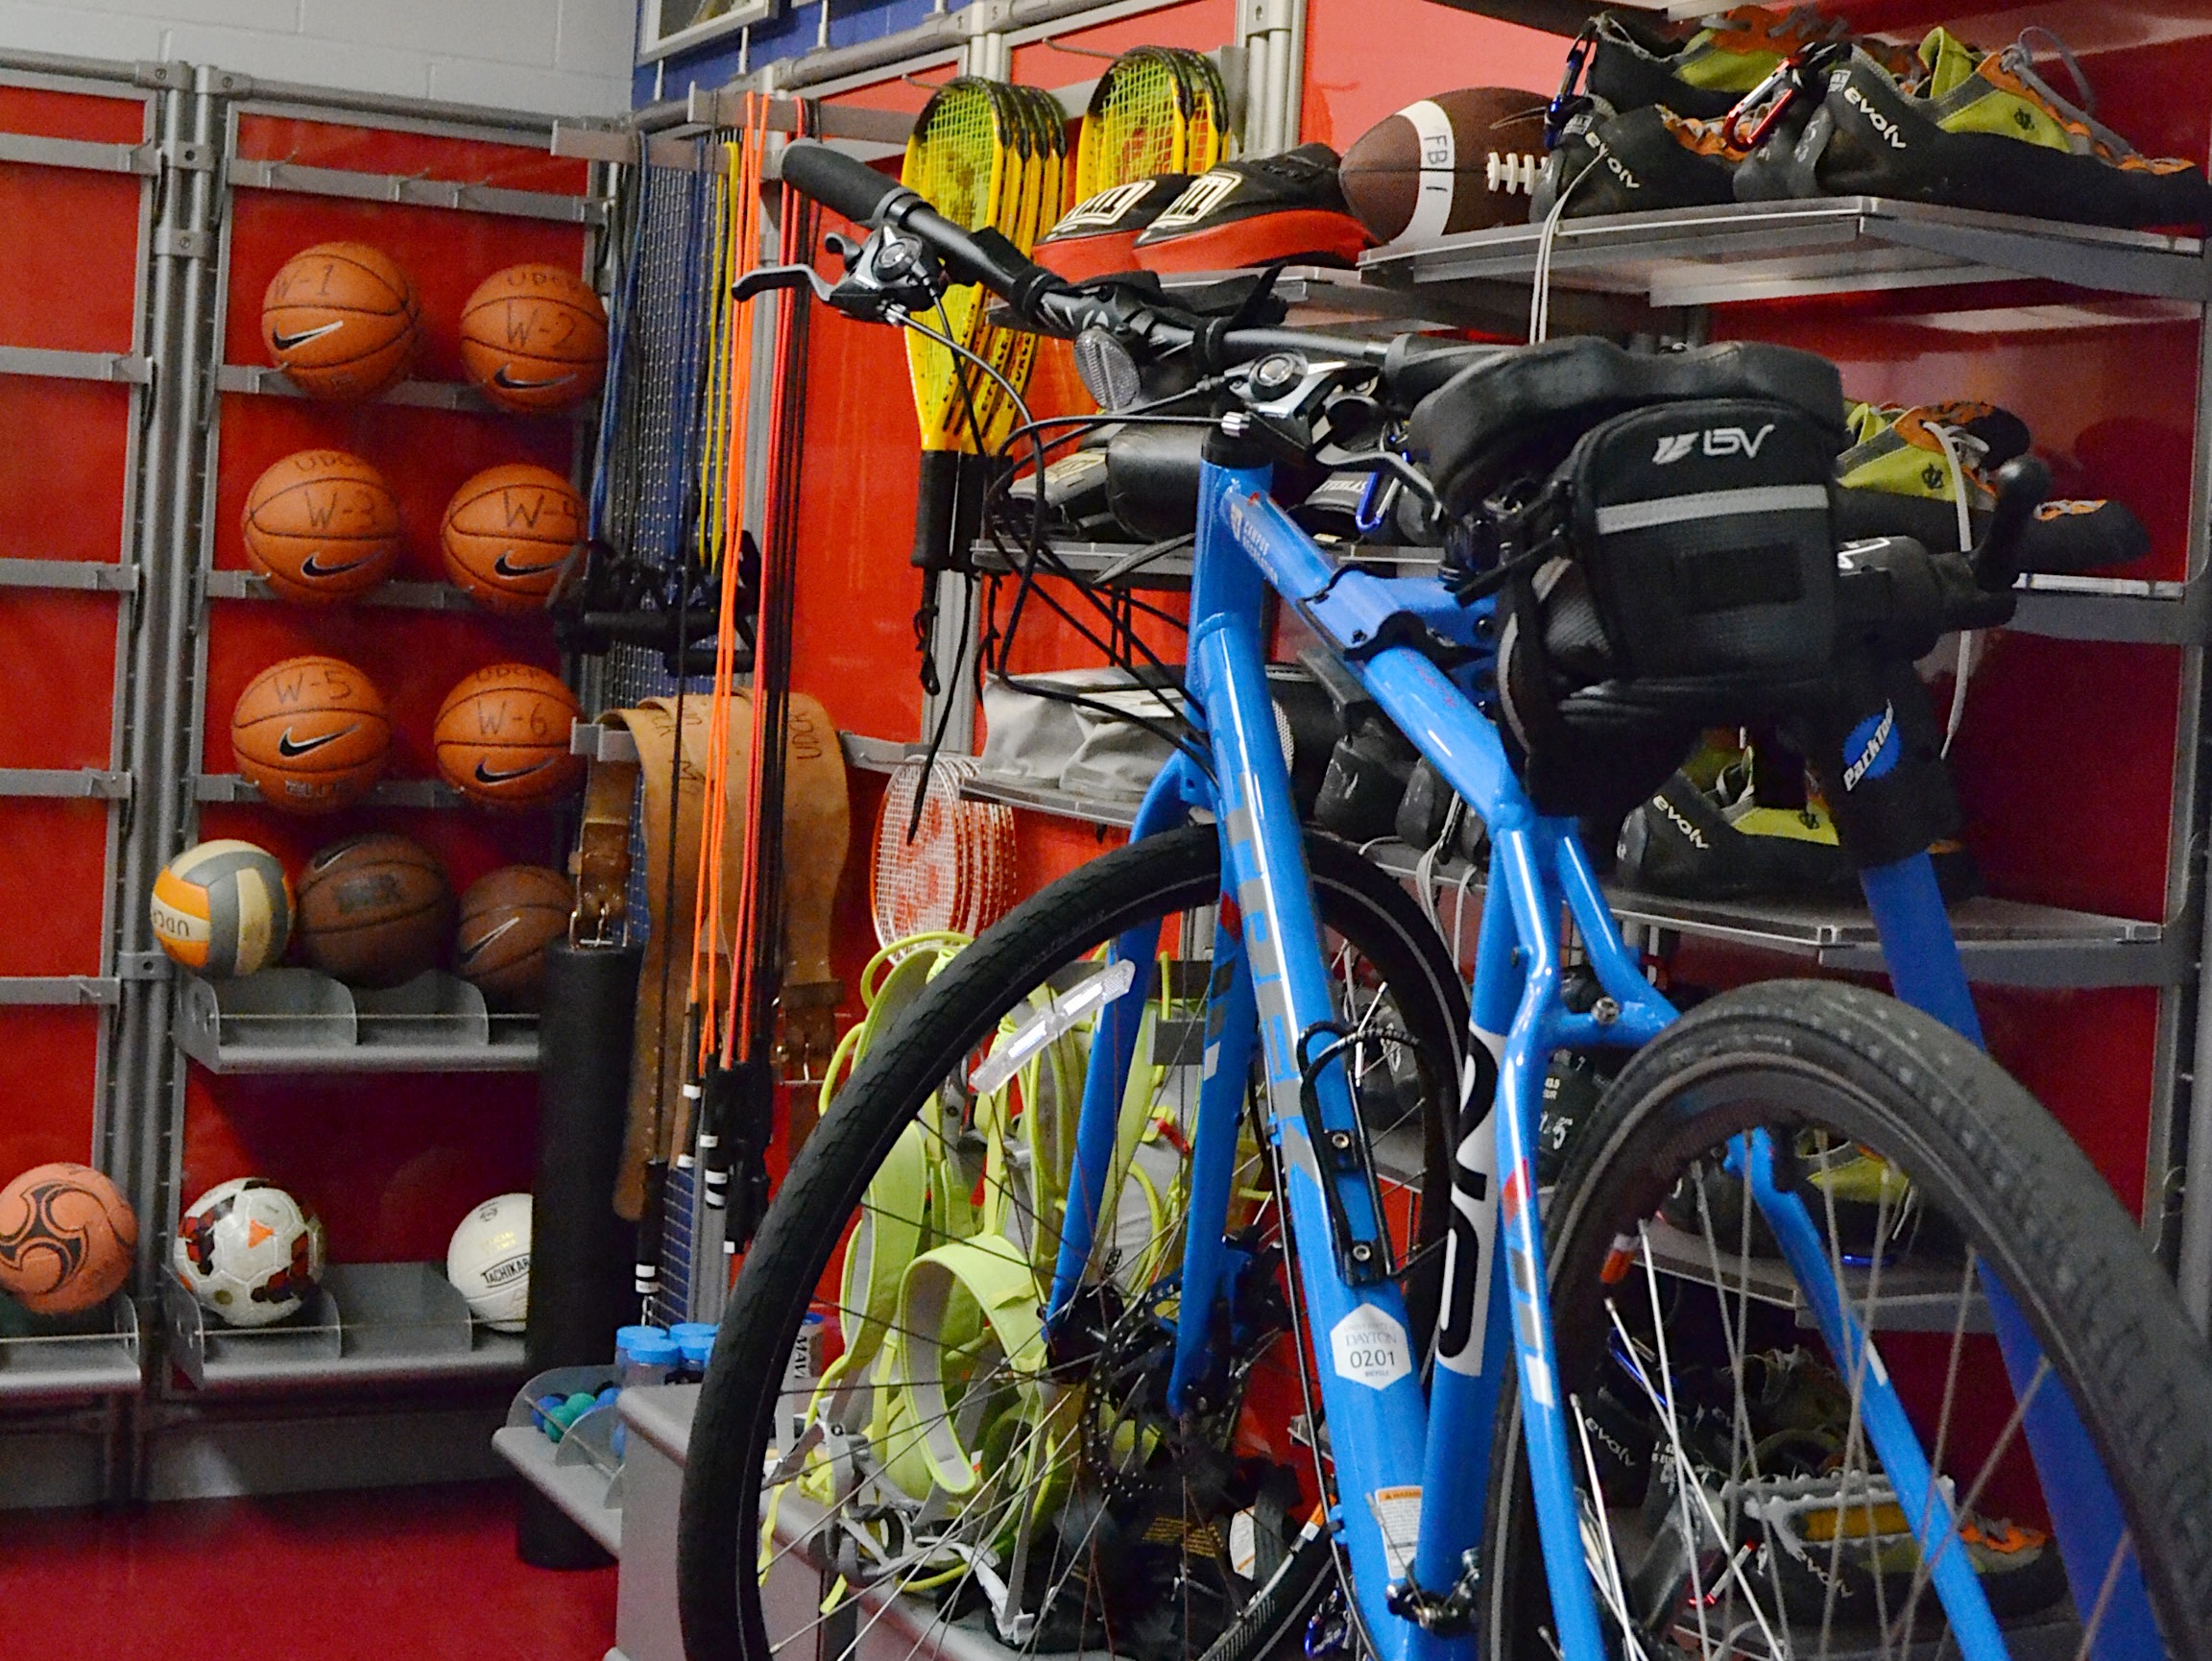 Image of the Equipment Resource Center with basketballs, bikes, tennis rackets, footballs, and more.